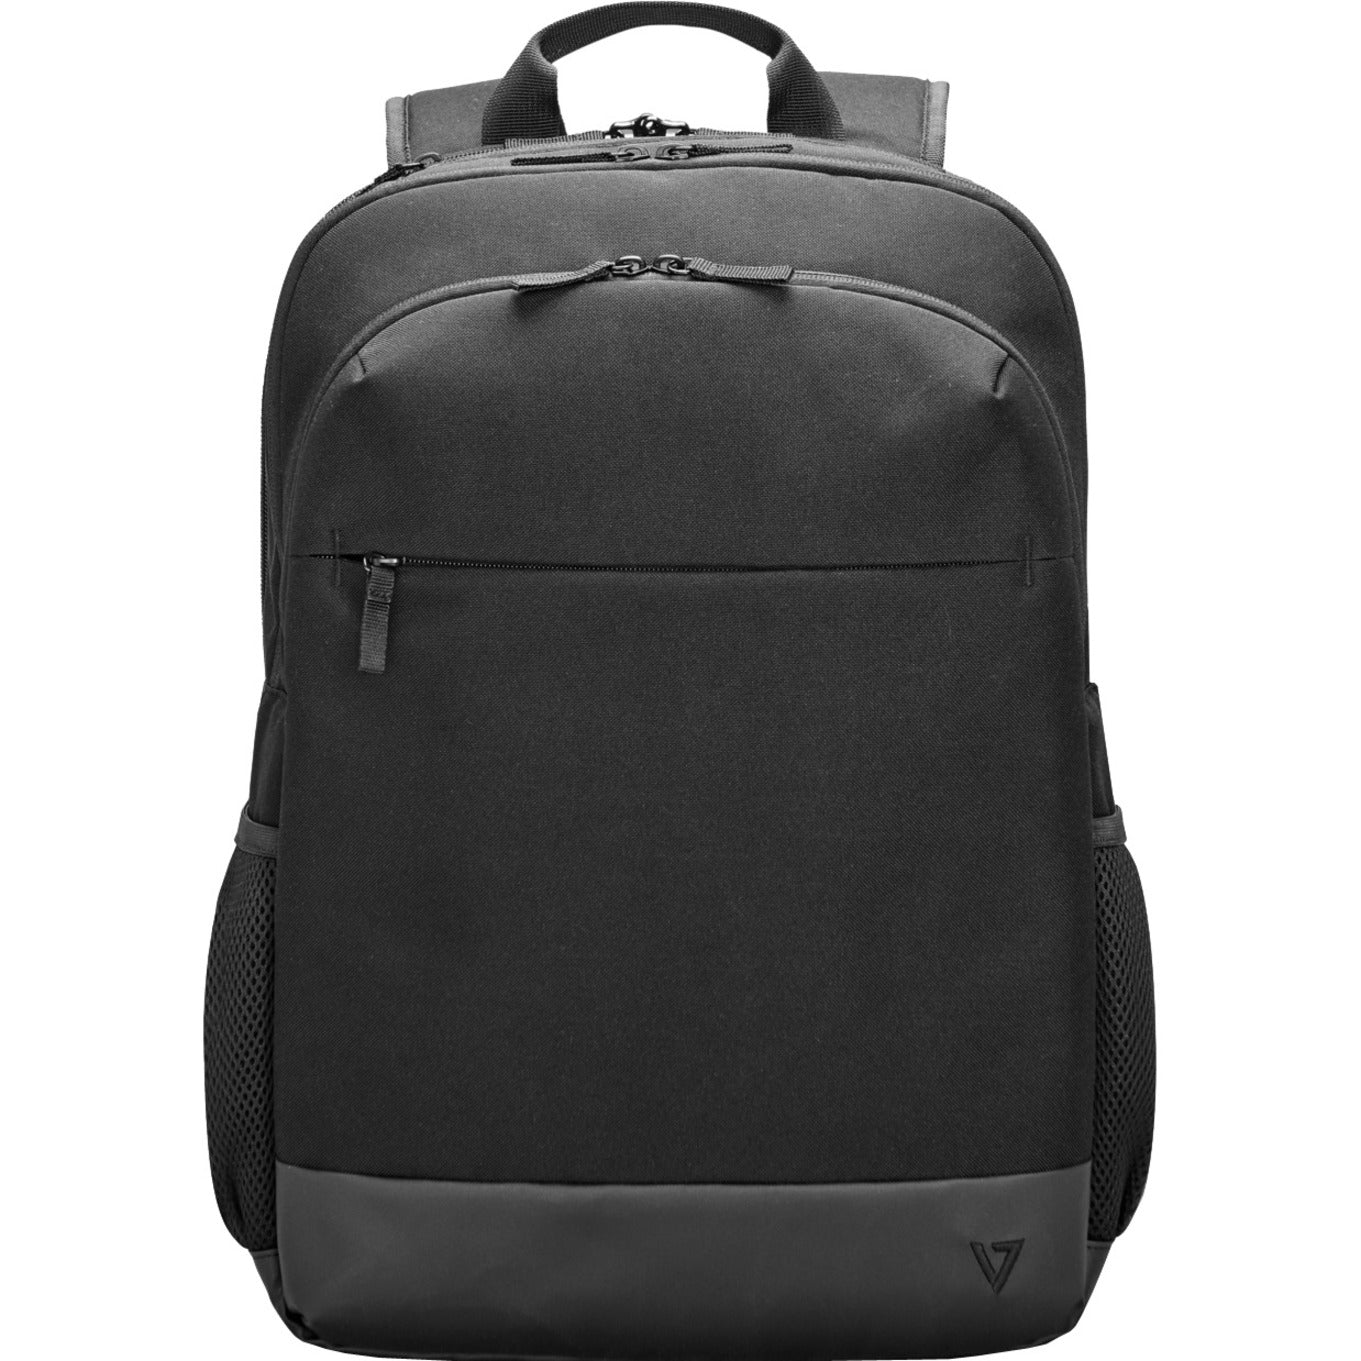 V7 Eco-Friendly CBP17-ECO-BLK Carrying Case (Backpack) for 17" to 17.3" Notebook - Black